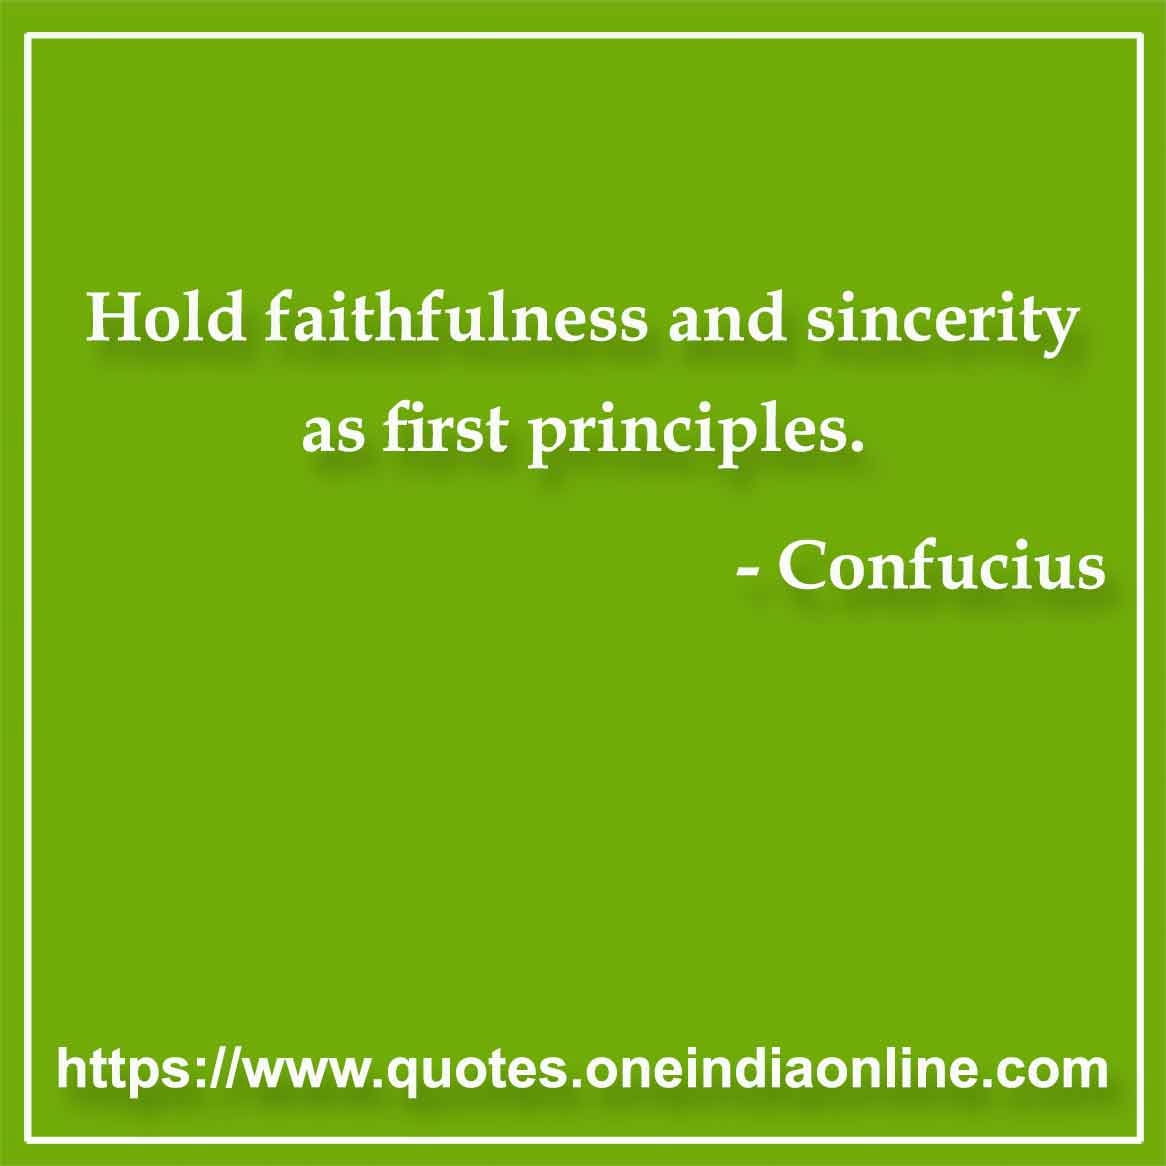 hold faithfulness and sincerity as first principles. confucius